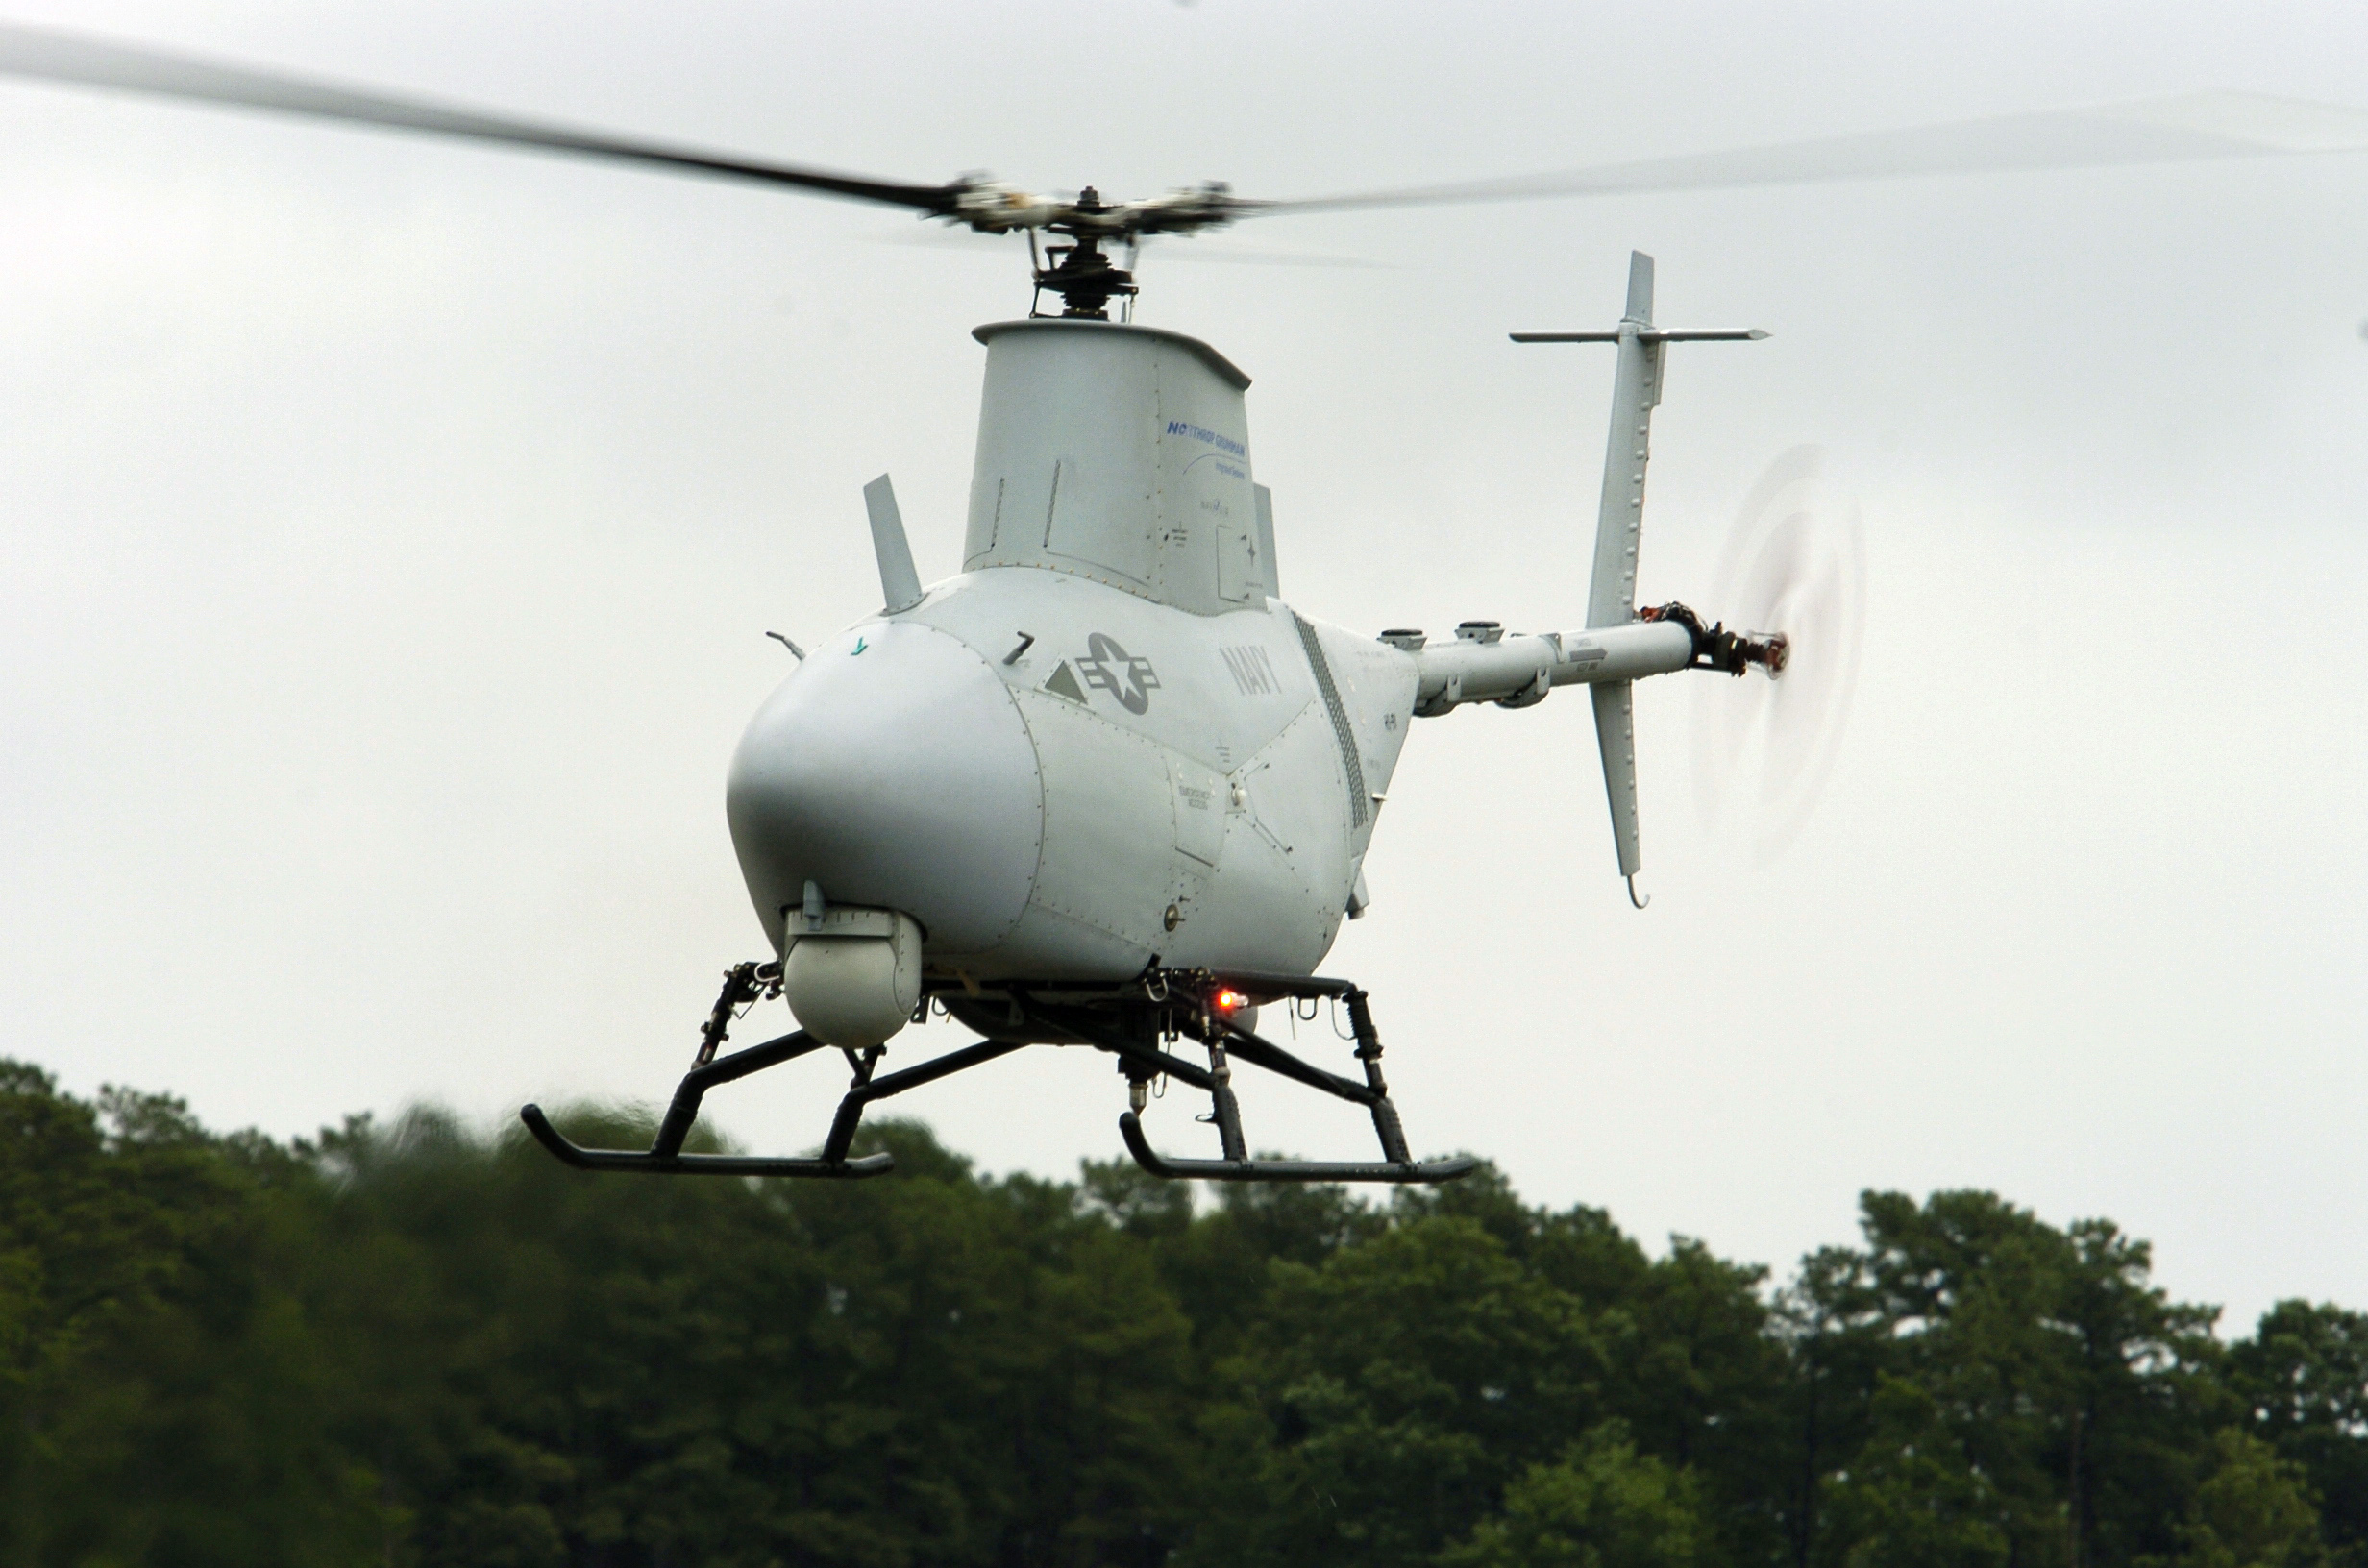 US Navy 050627-N-0295M-154 A RQ-8A Fire Scout Vertical Takeoff and Landing Tactical Unmanned Aerial Vehicle (VTUAV) System takes off for a flight demonstration at the 2005 Naval Unmanned Aerial Vehicle Air Demo